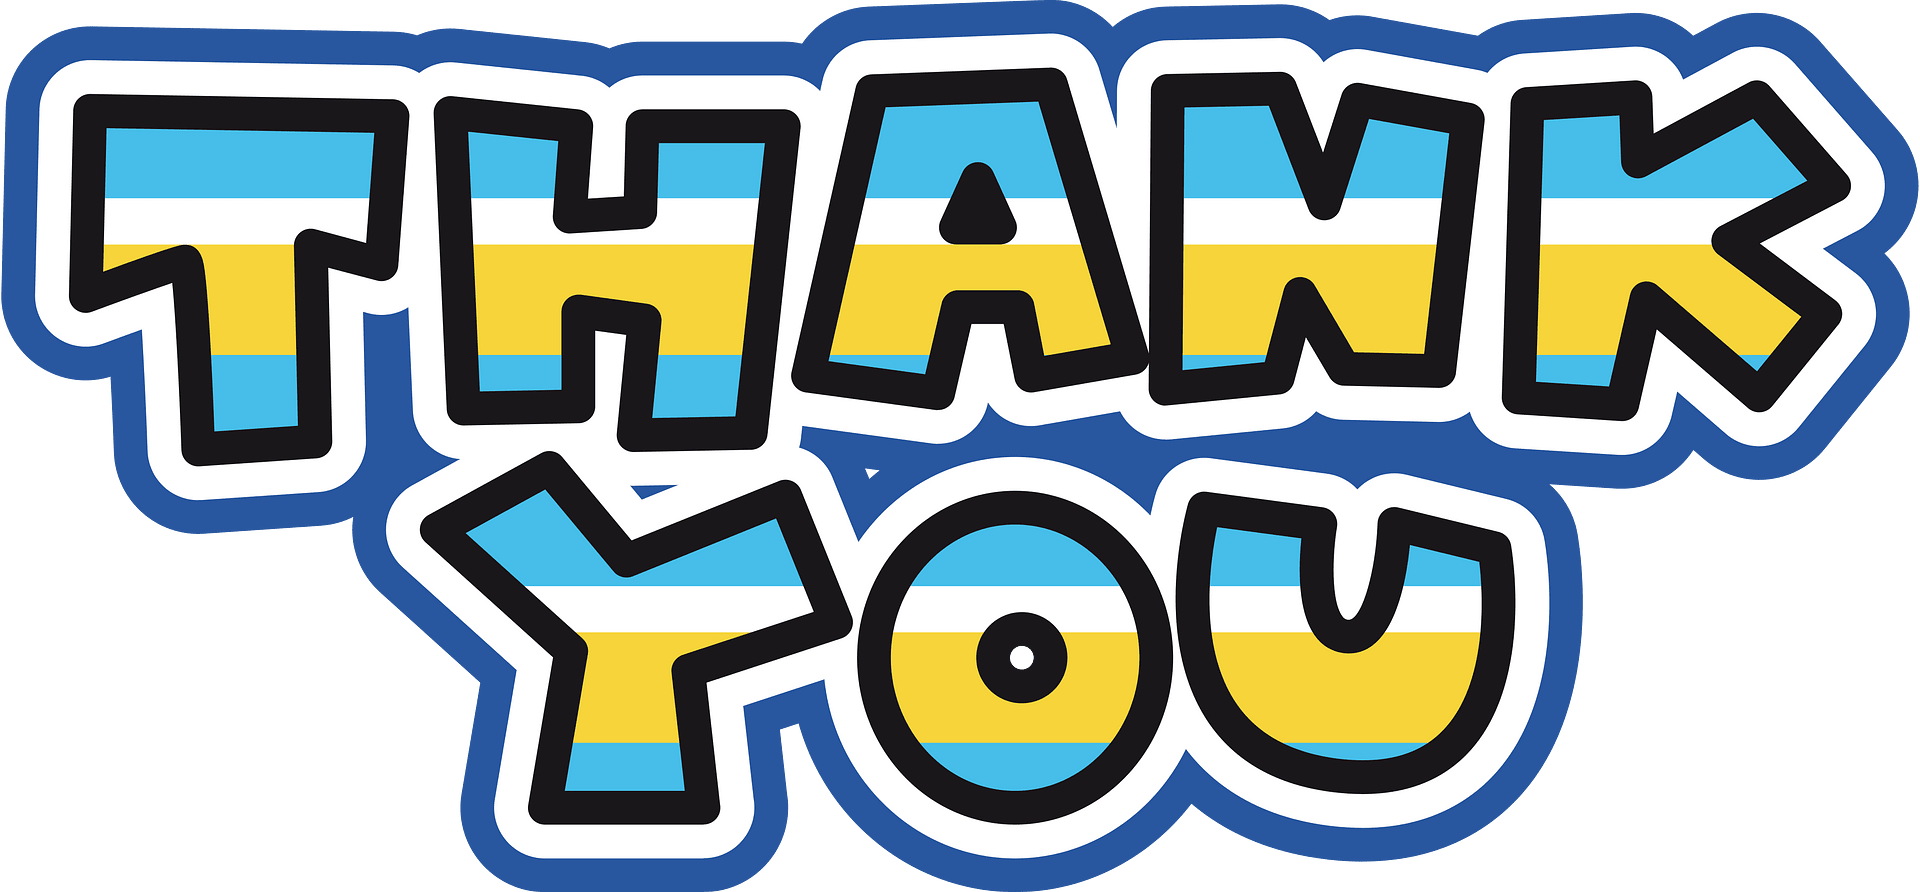 Thank You Png Thank You Clip Art Free Transparent Png Vhv Clip